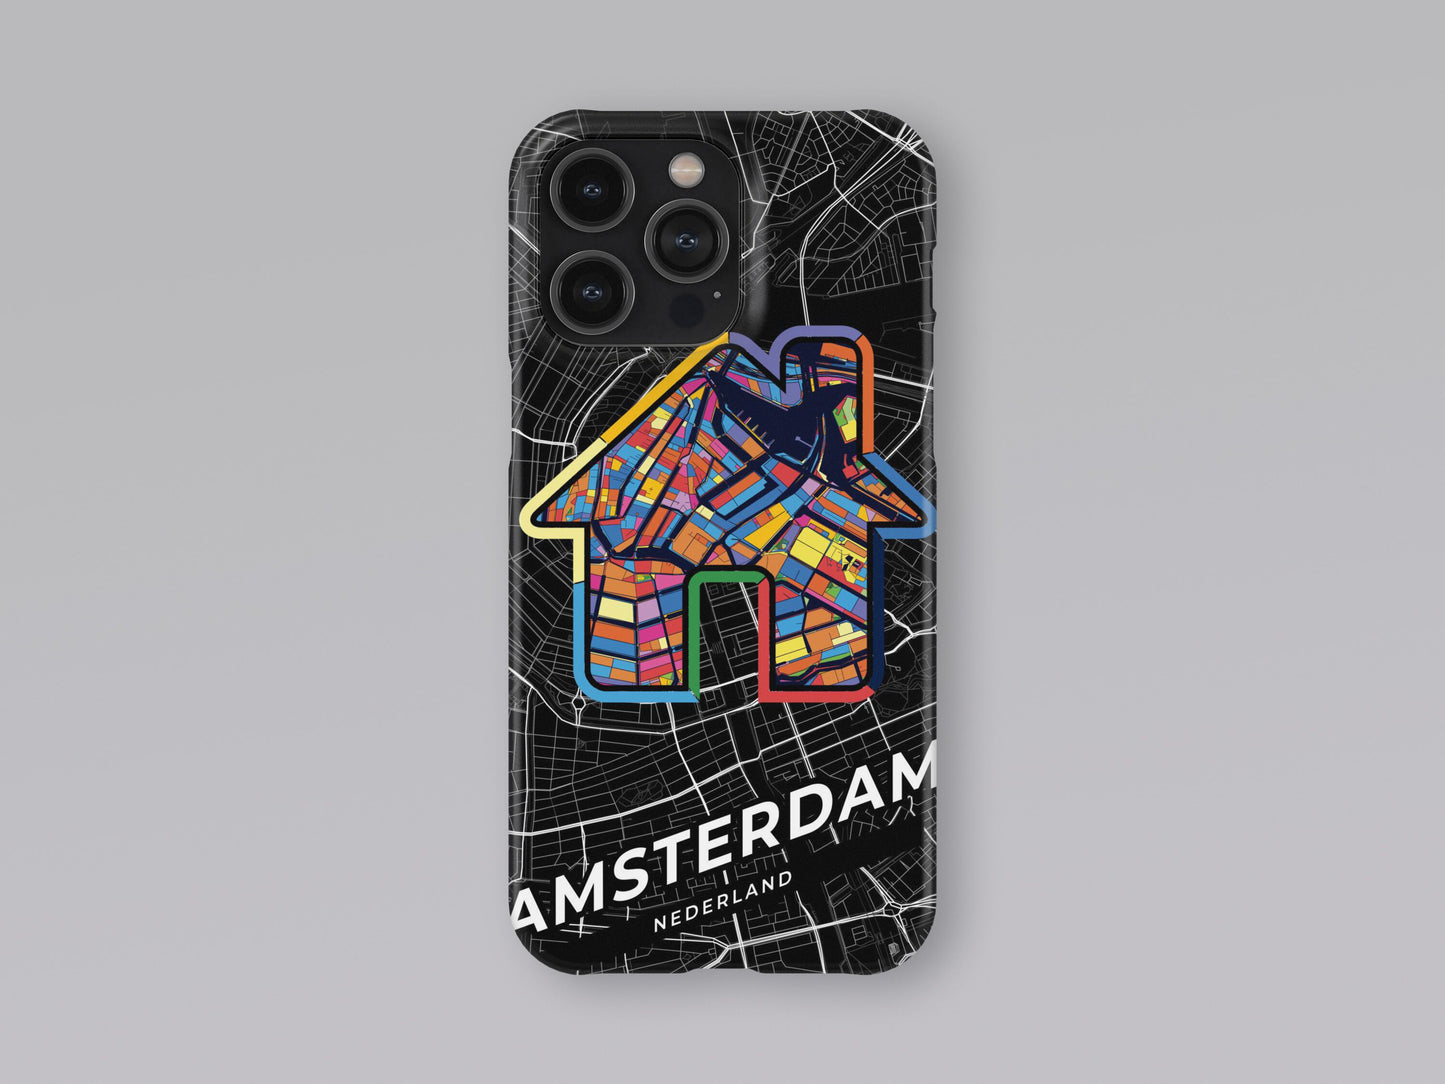 Amsterdam Netherlands slim phone case with colorful icon. Birthday, wedding or housewarming gift. Couple match cases. 3